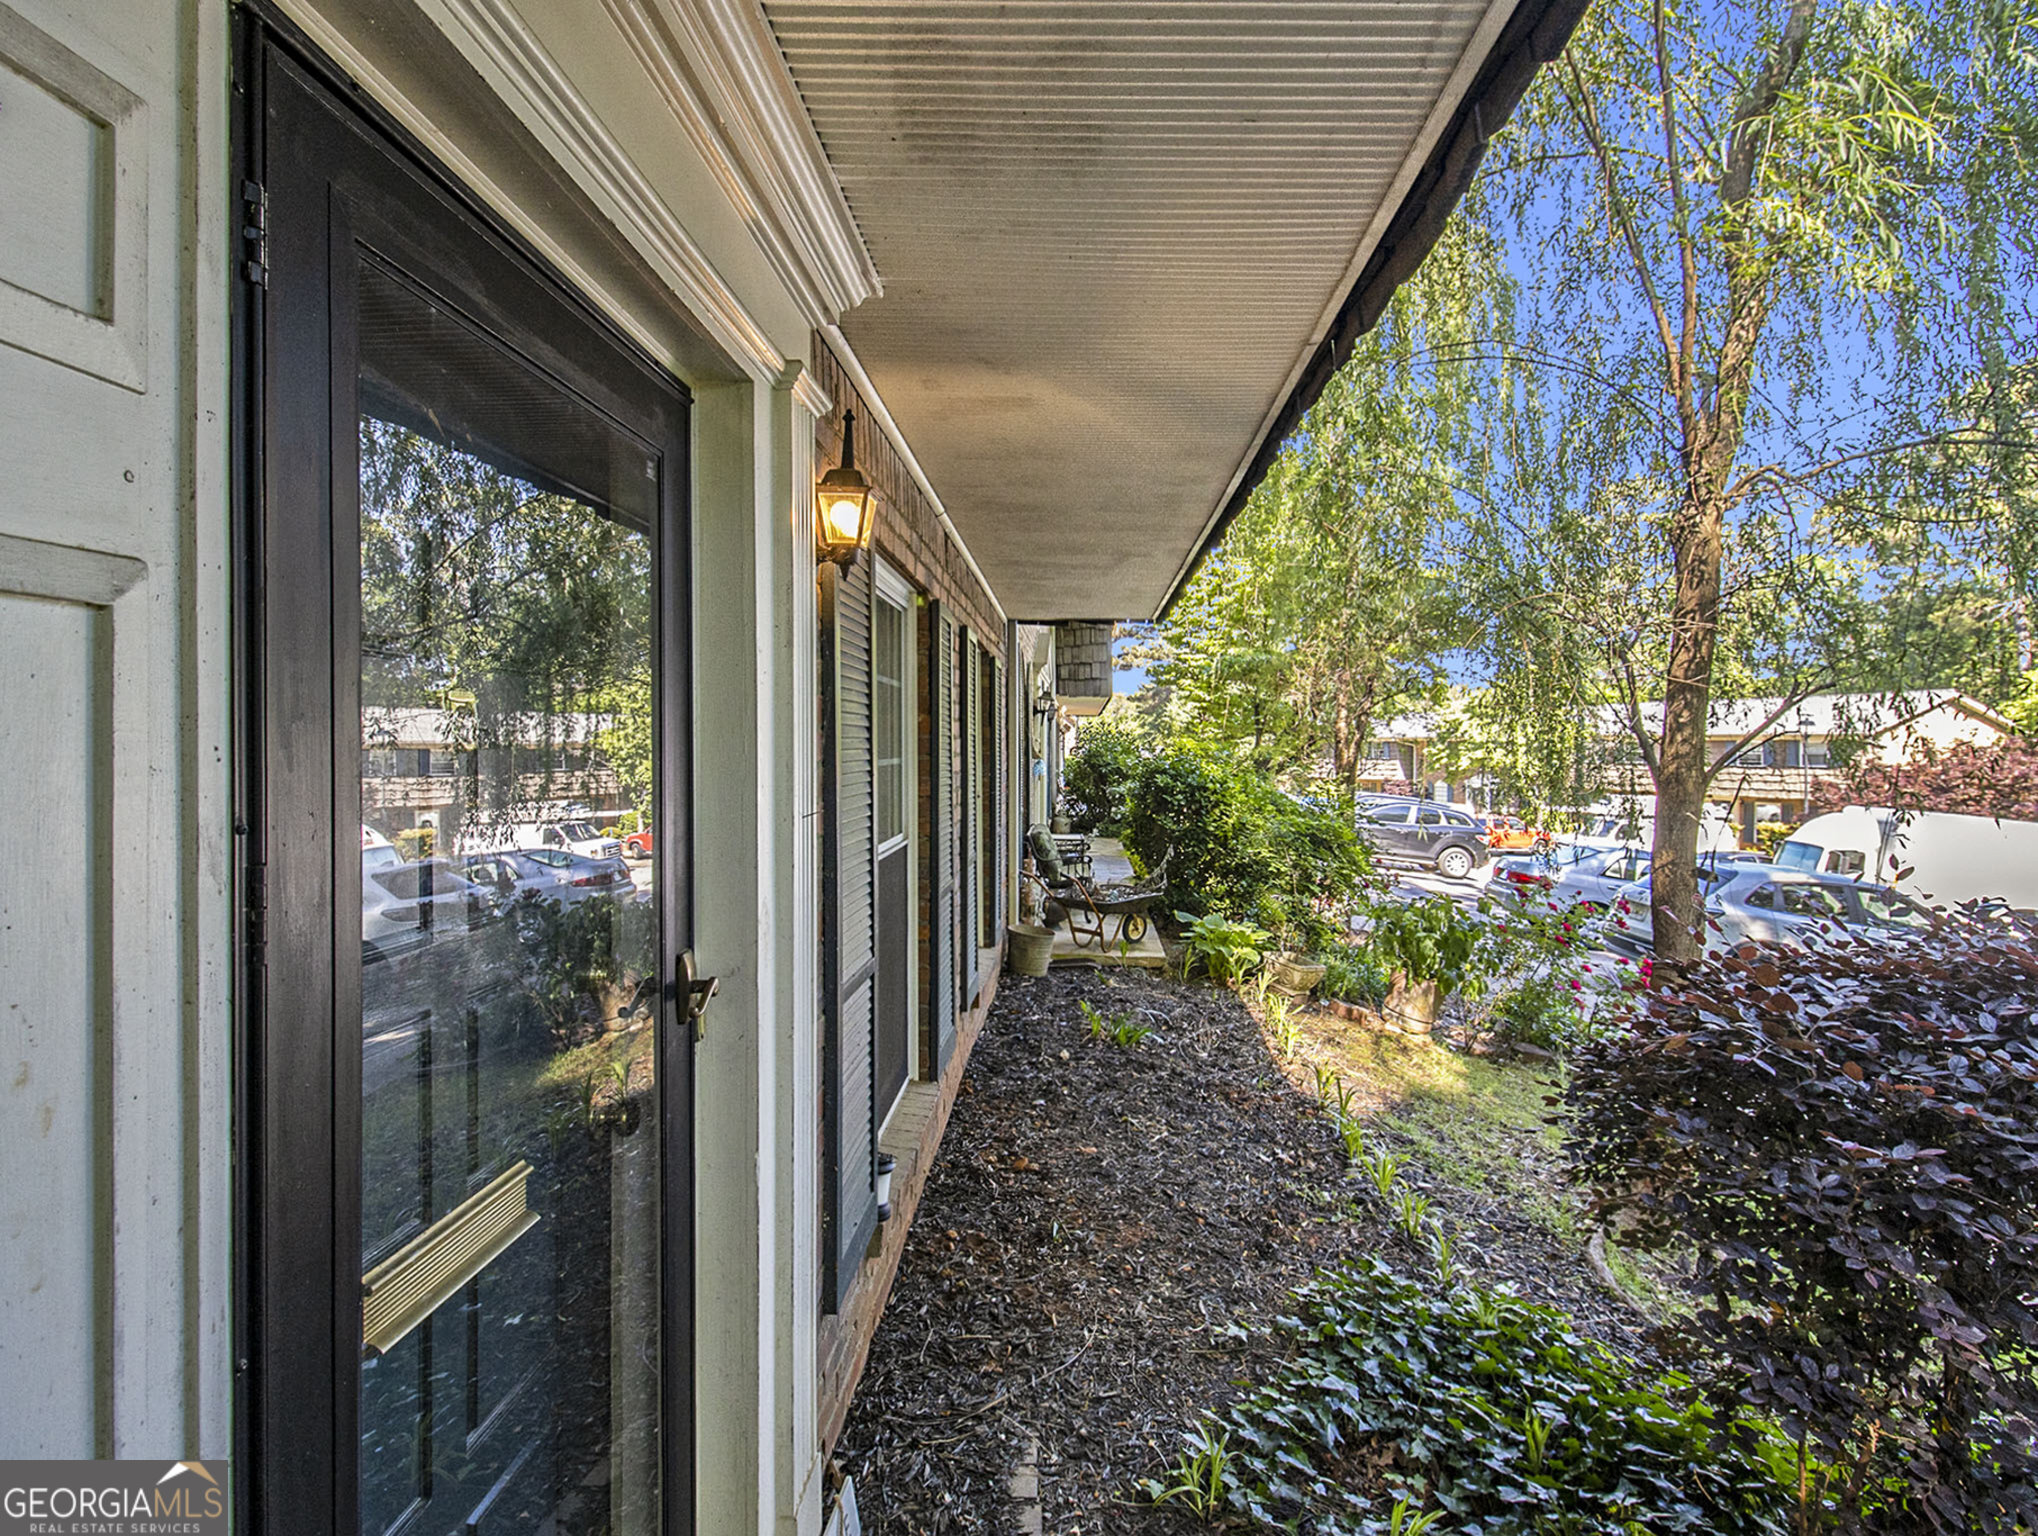 View Doraville, GA 30340 townhome